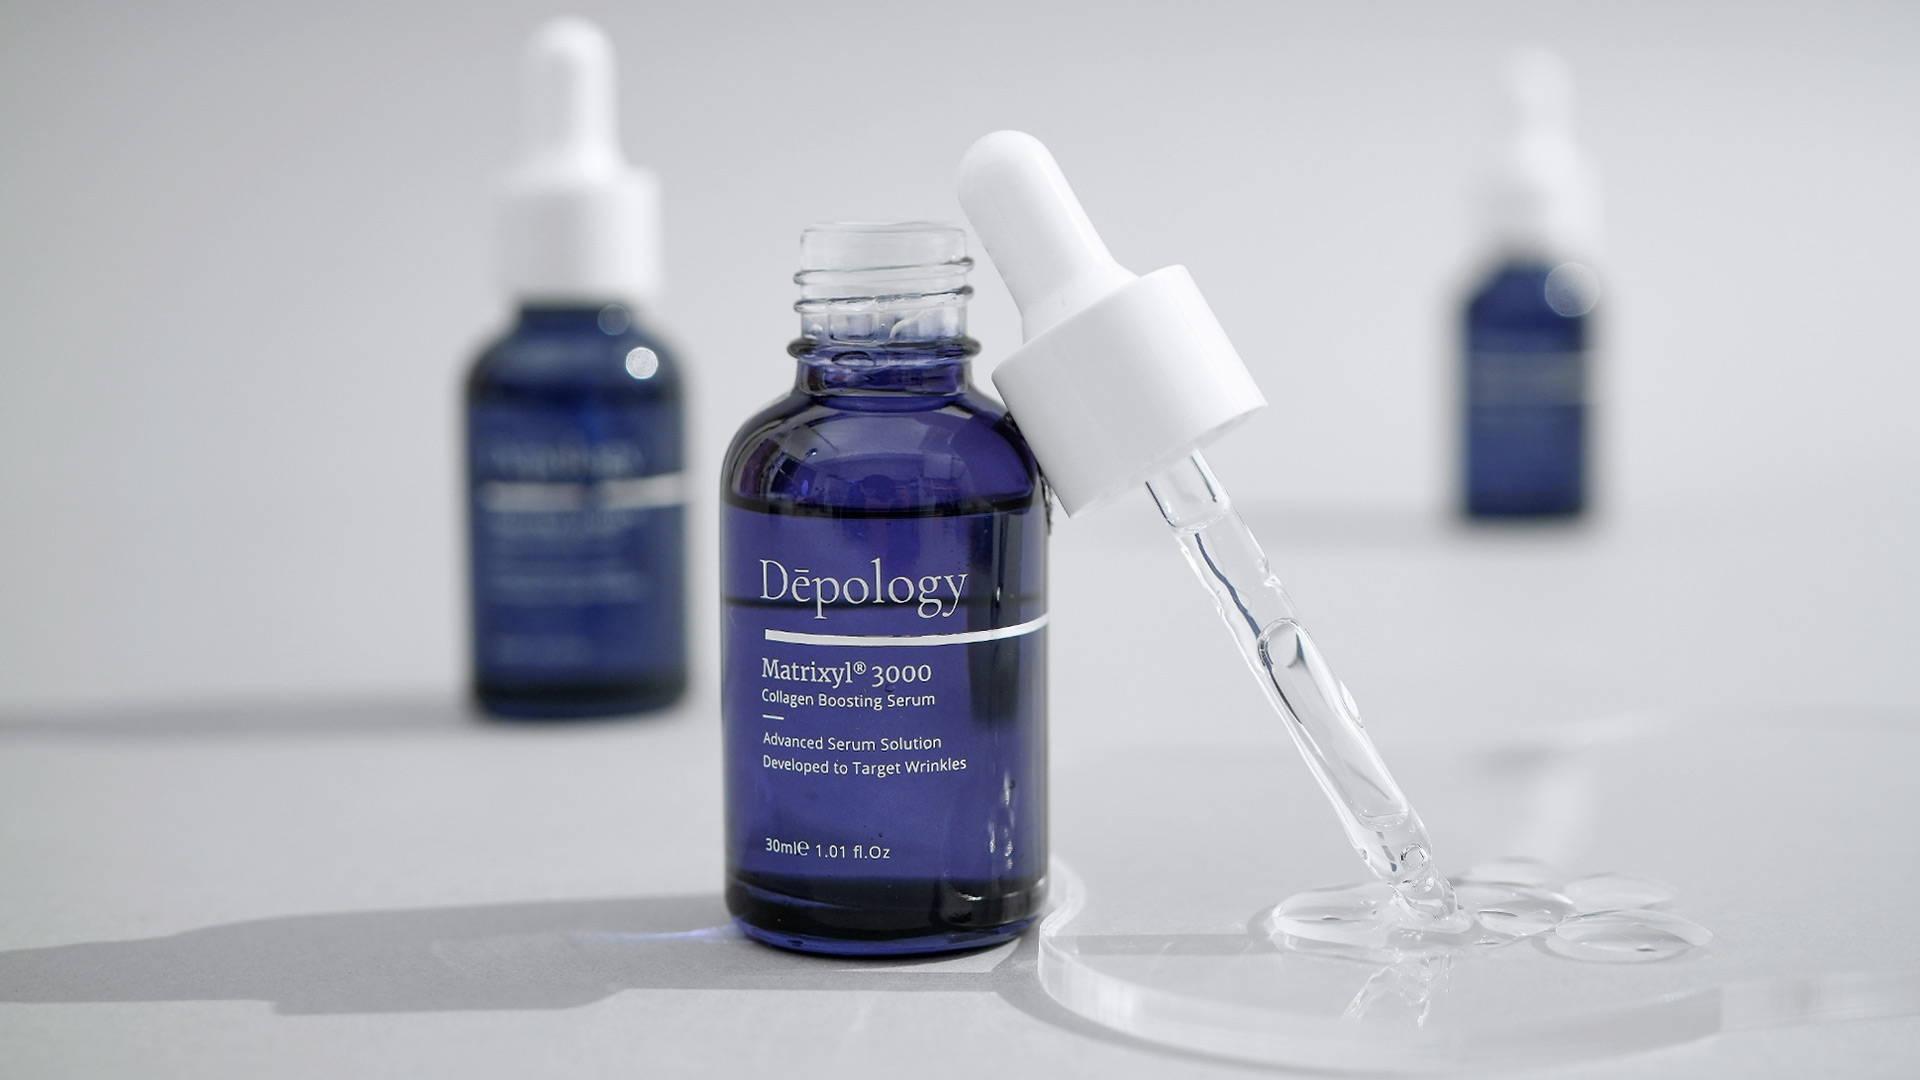 A blue bottle of Depology Matrixyl 3000 Collagen Boosting Serum with a white dropper.